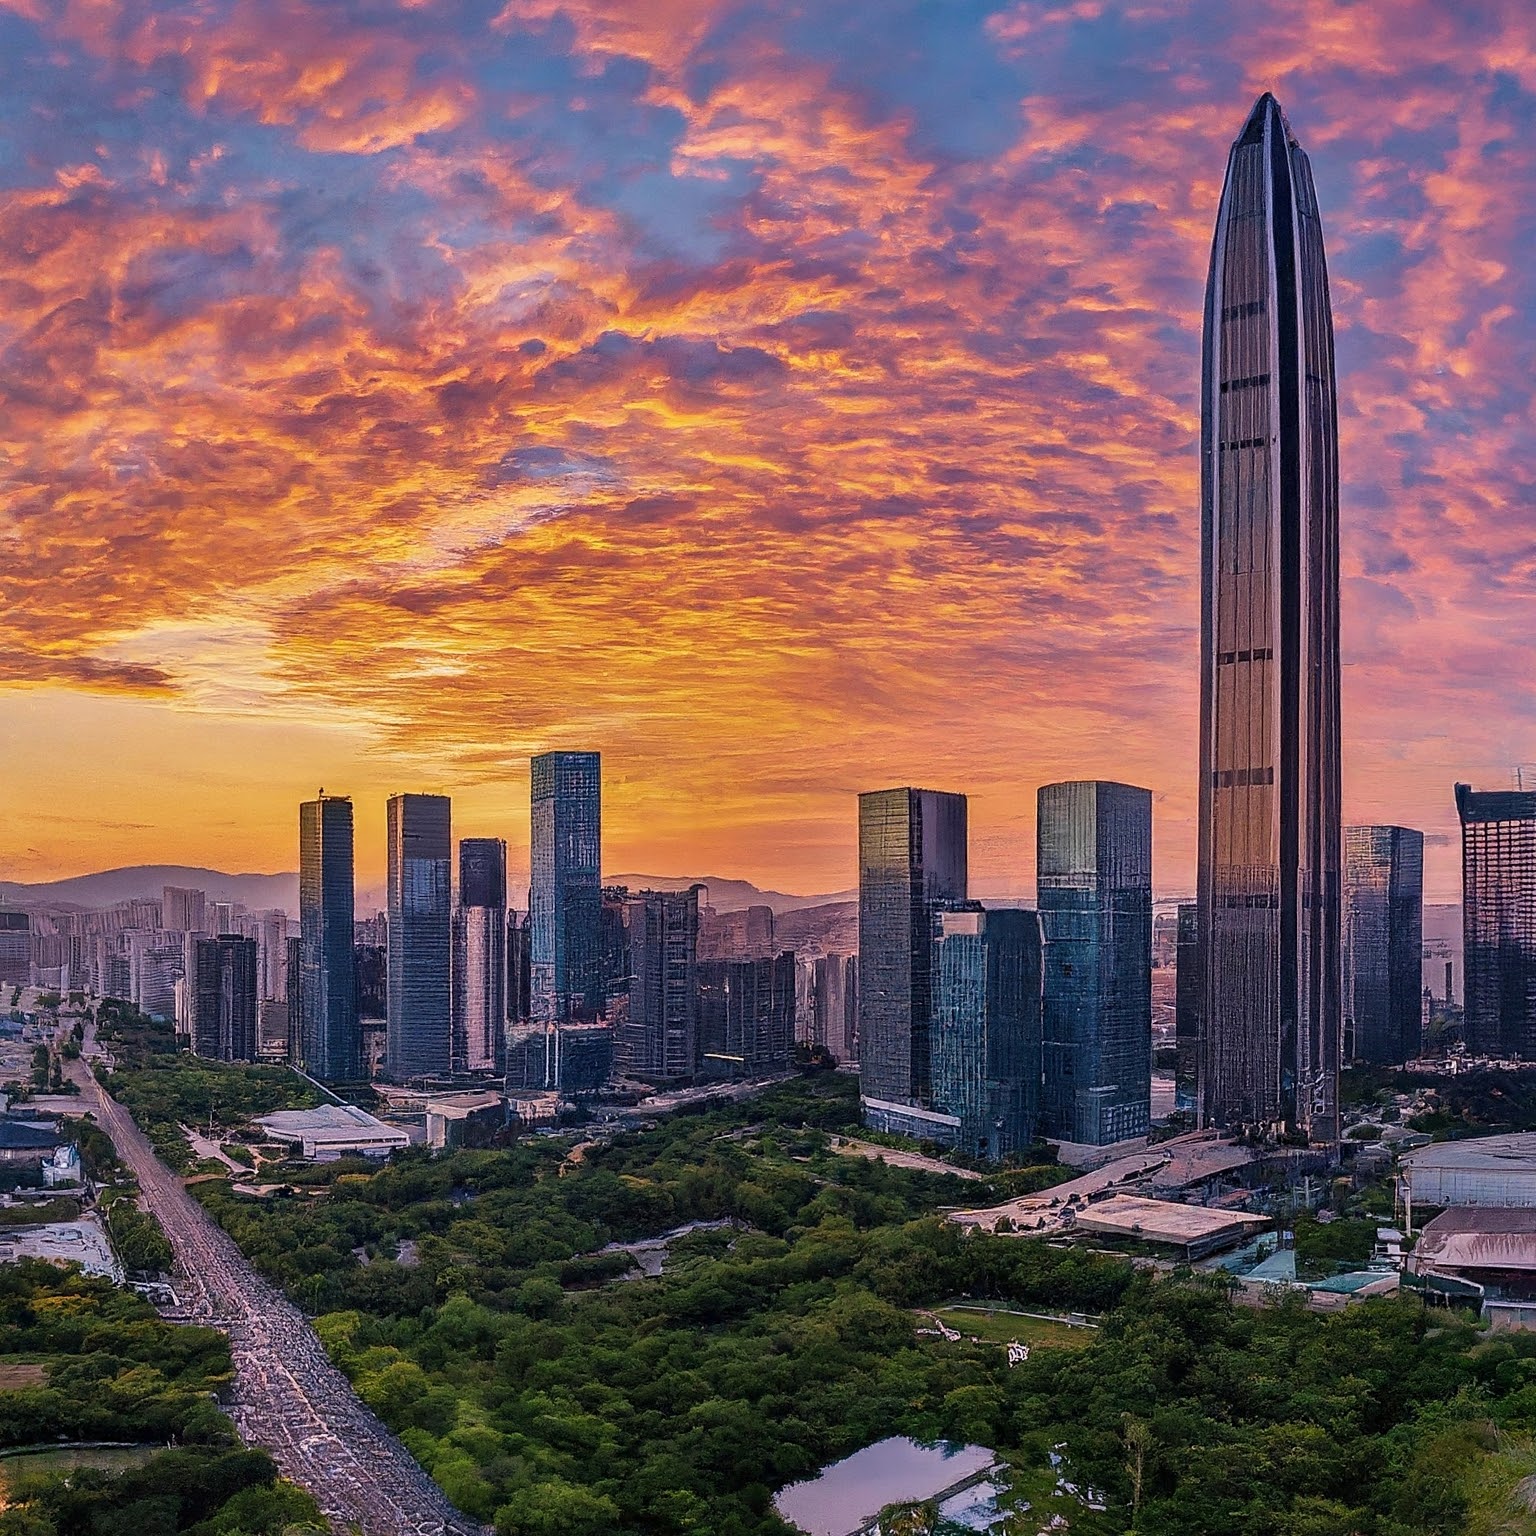 Shenzhen skyline at dusk with futuristic skyscrapers.